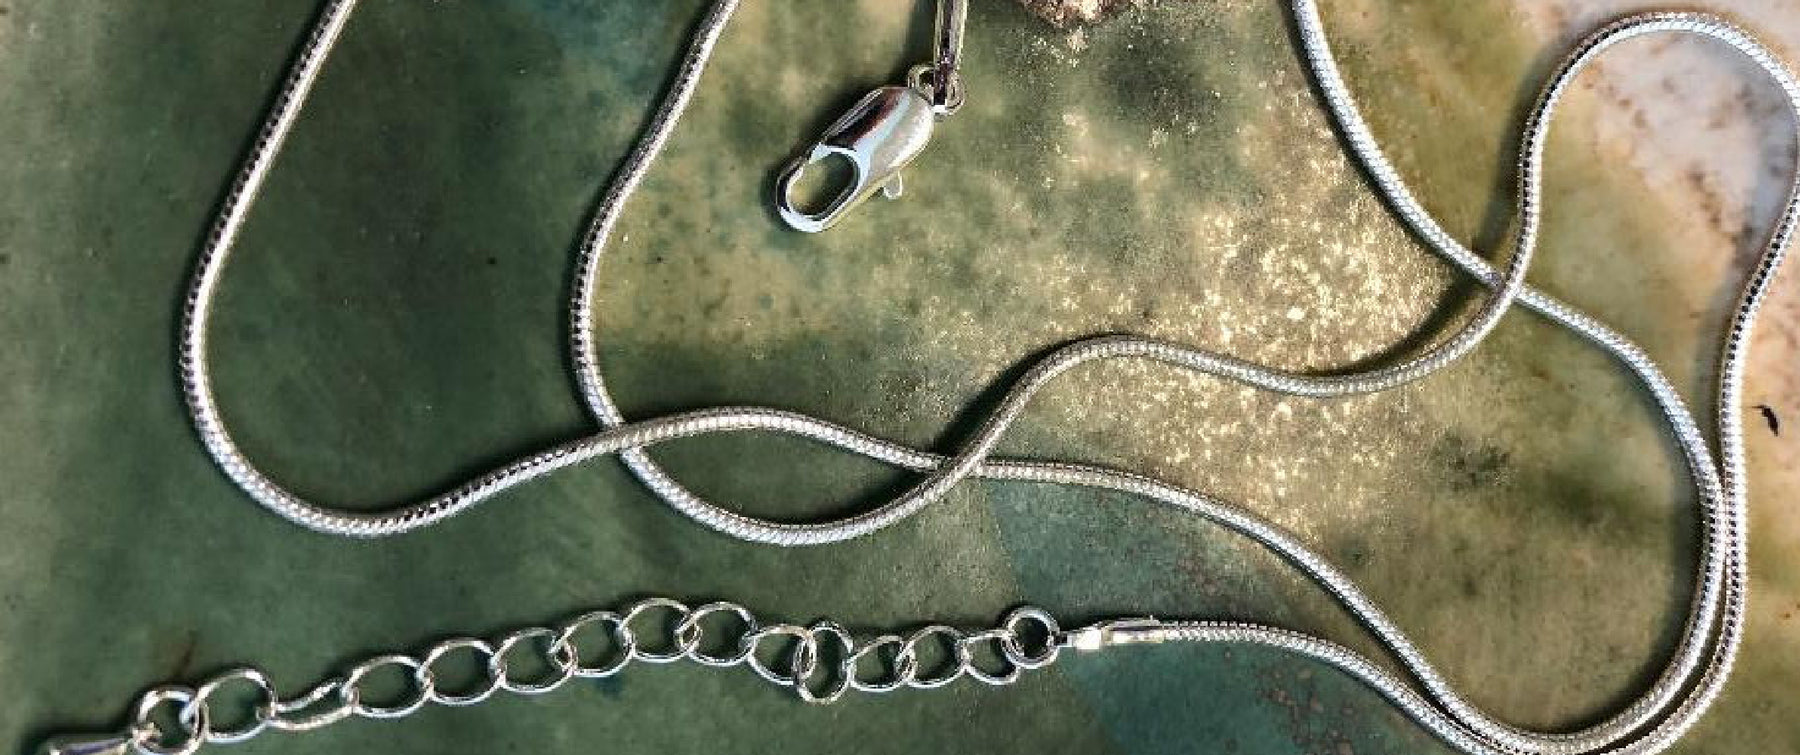 Superior Quality Sterling Silver Chains Restocked!